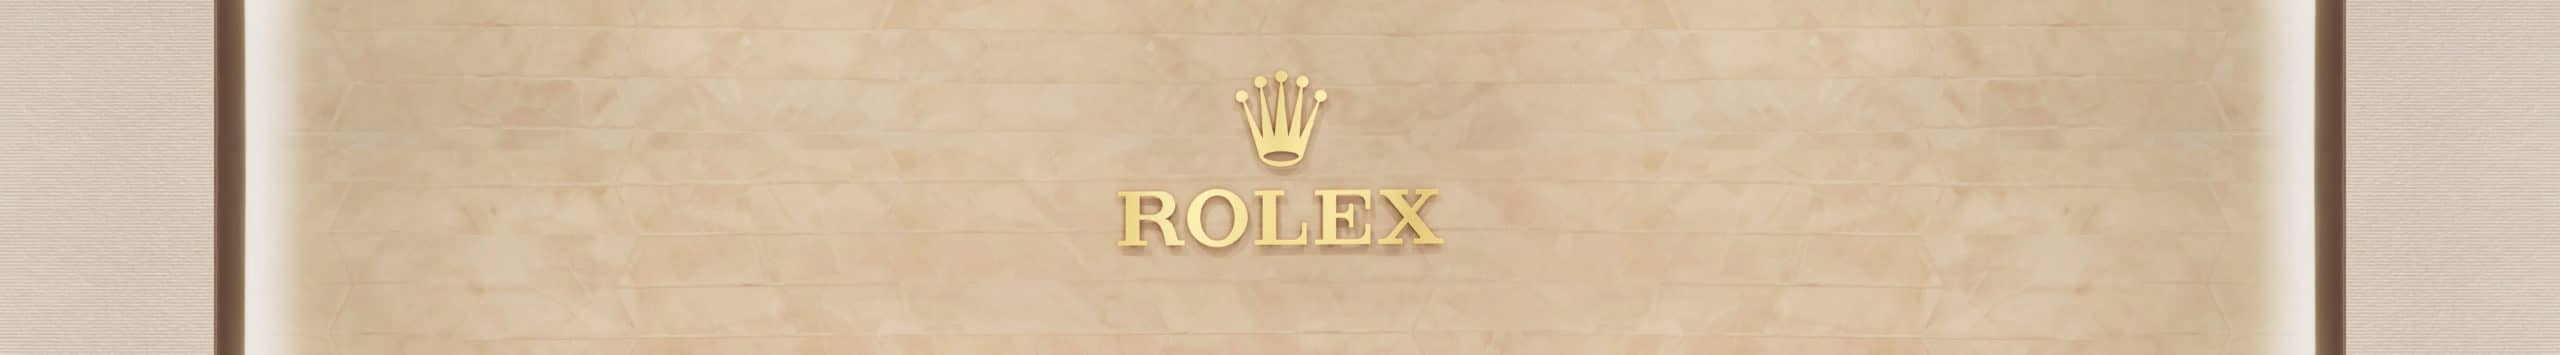 Rolex Our History | Rolex Official Retailer - The Time Place Singapore